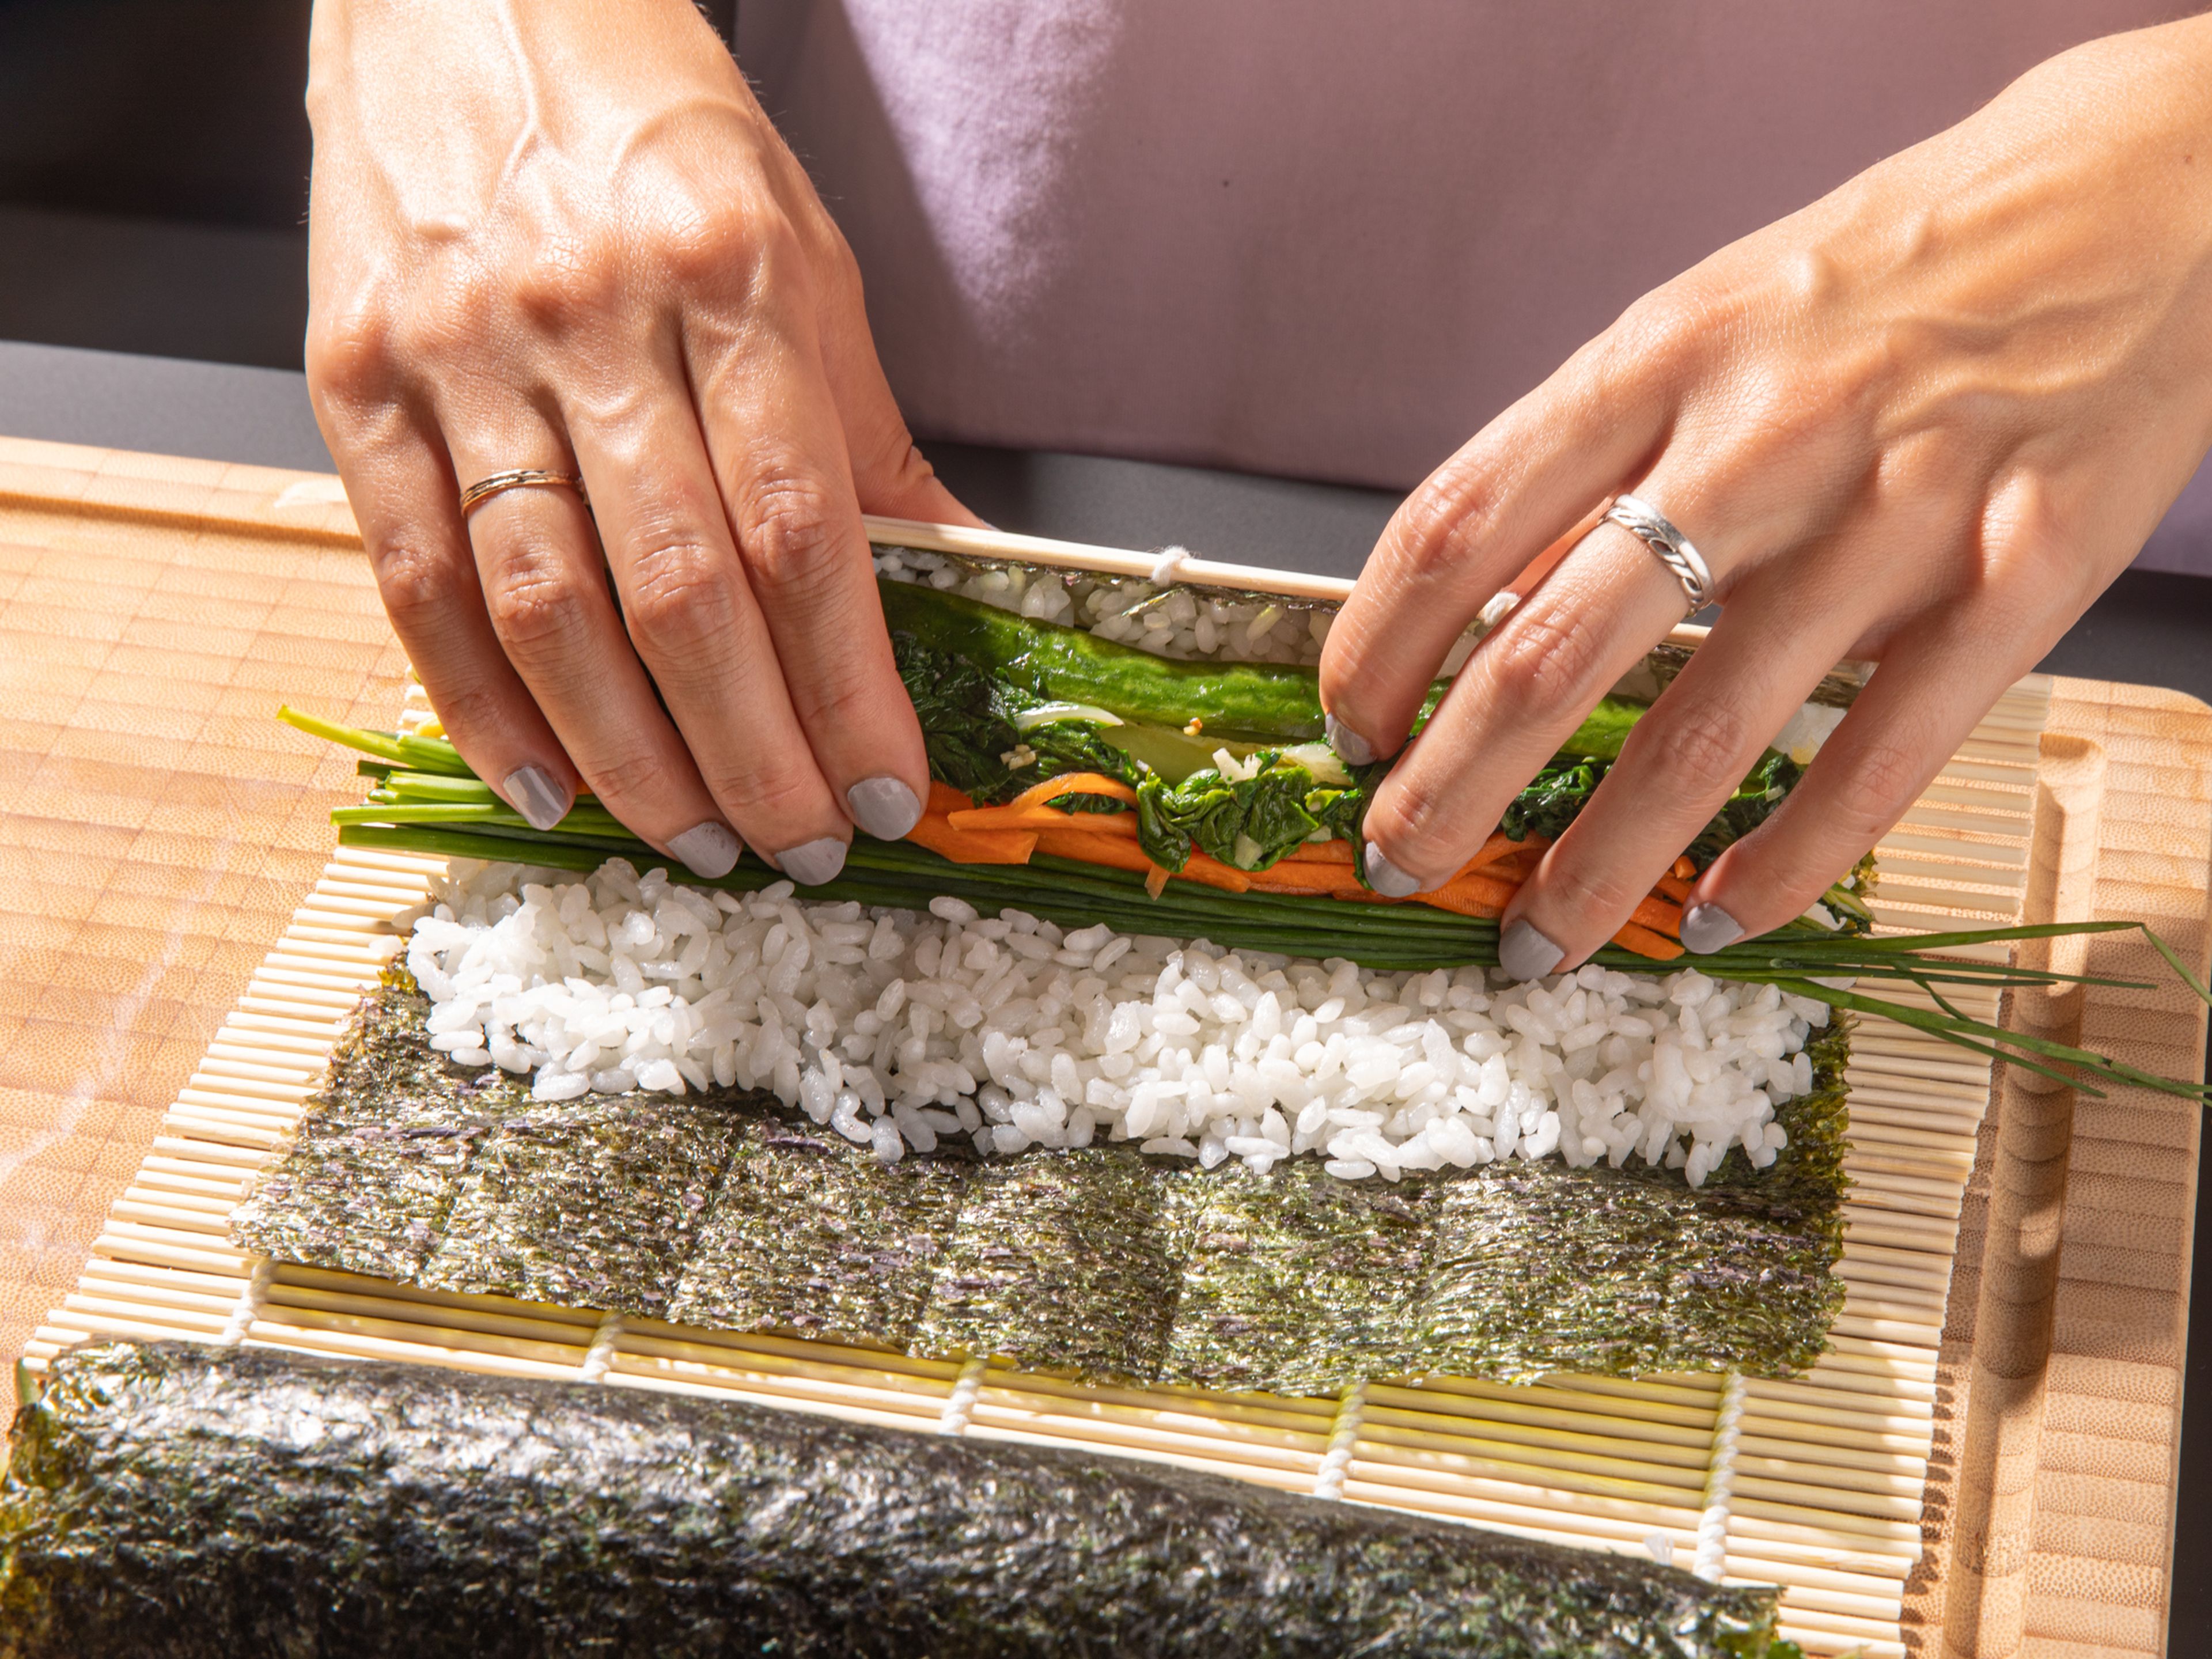 To assemble the kimbap, place a sheet of nori (shiny side down) on a bamboo rolling mat. Spread half the rice over the nori, leaving about 2 inches exposed on the top. Place half the green beans, Swiss chard, chives, egg strips, and pickled cucumber and carrot (draining well) into the center of the rice. Use the mat and both hands to help you roll the kimbap, pressing it into a very tight roll. Remove the roll and repeat. Brush the kimbap with some toasted sesame oil, then slice into thick pieces. Serve immediately or pack up and enjoy later!